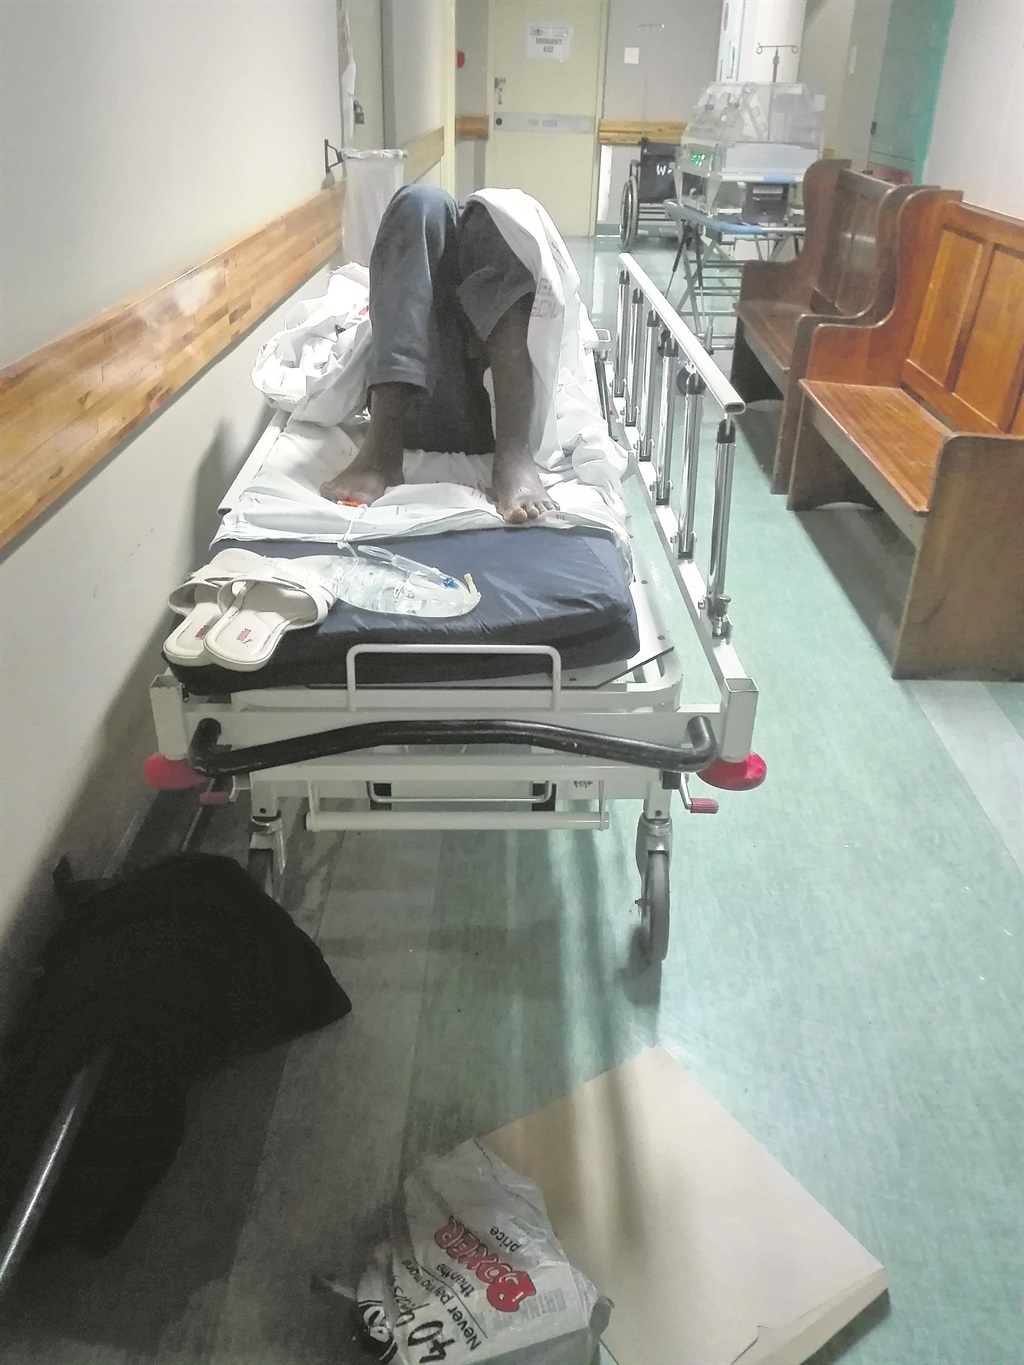 According to a source, there are over 30 patients without beds at Edenvale Hospital. 